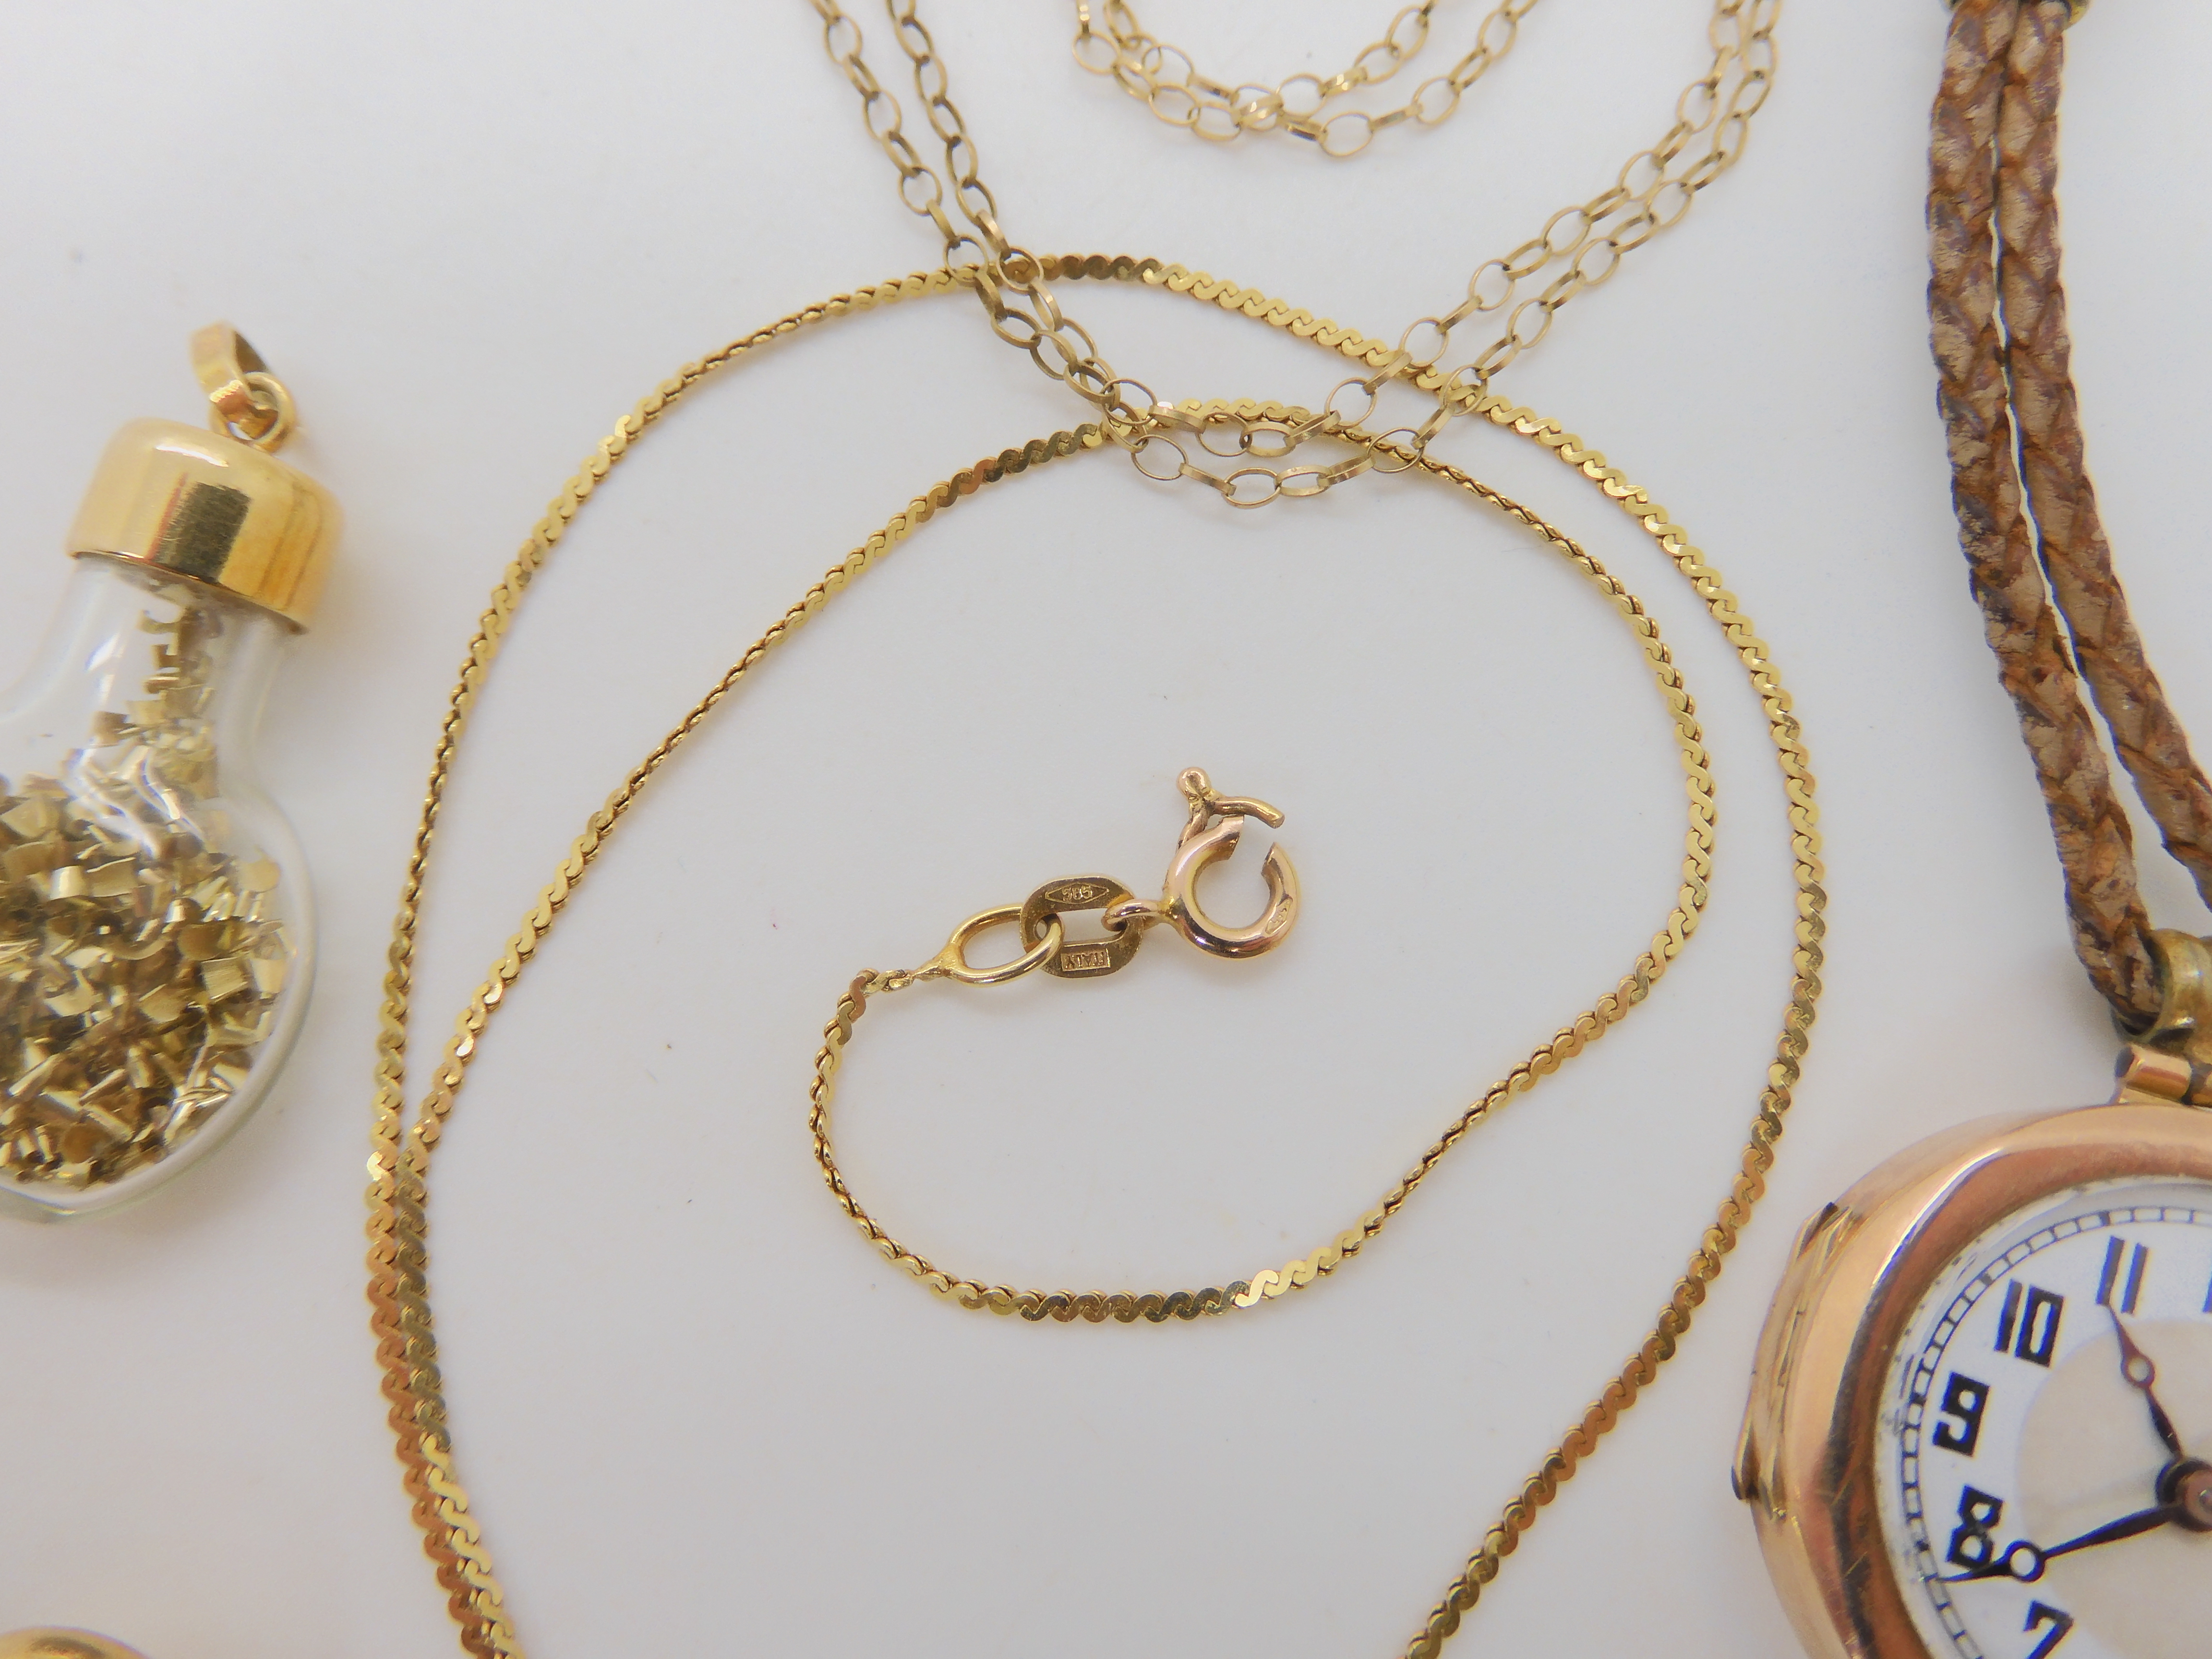 A 14k gold chain (clasp broken) and two 14k pendants, weight together 6.4gms, 9ct cased ladies - Image 2 of 2